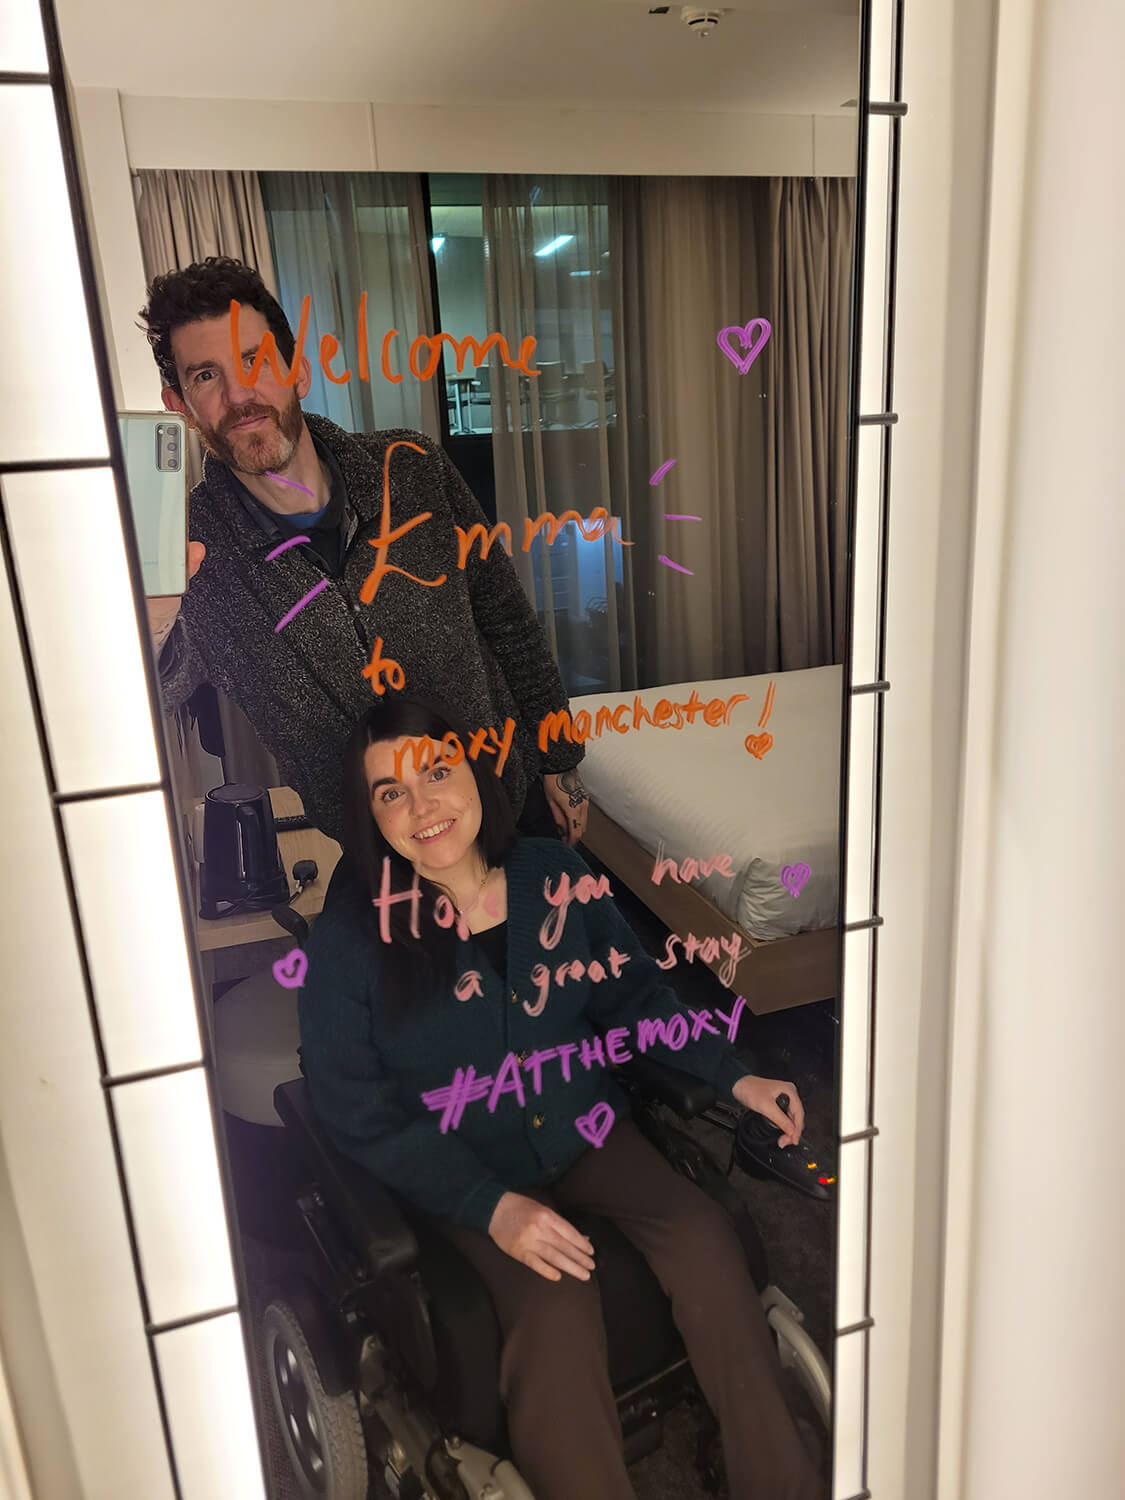 A mirror selfie of Emma and Allan. There is a handwritten message on the mirror saying "Welcome Emma to Moxy Manchester. Hope you have a great stay #AtTheMoxy